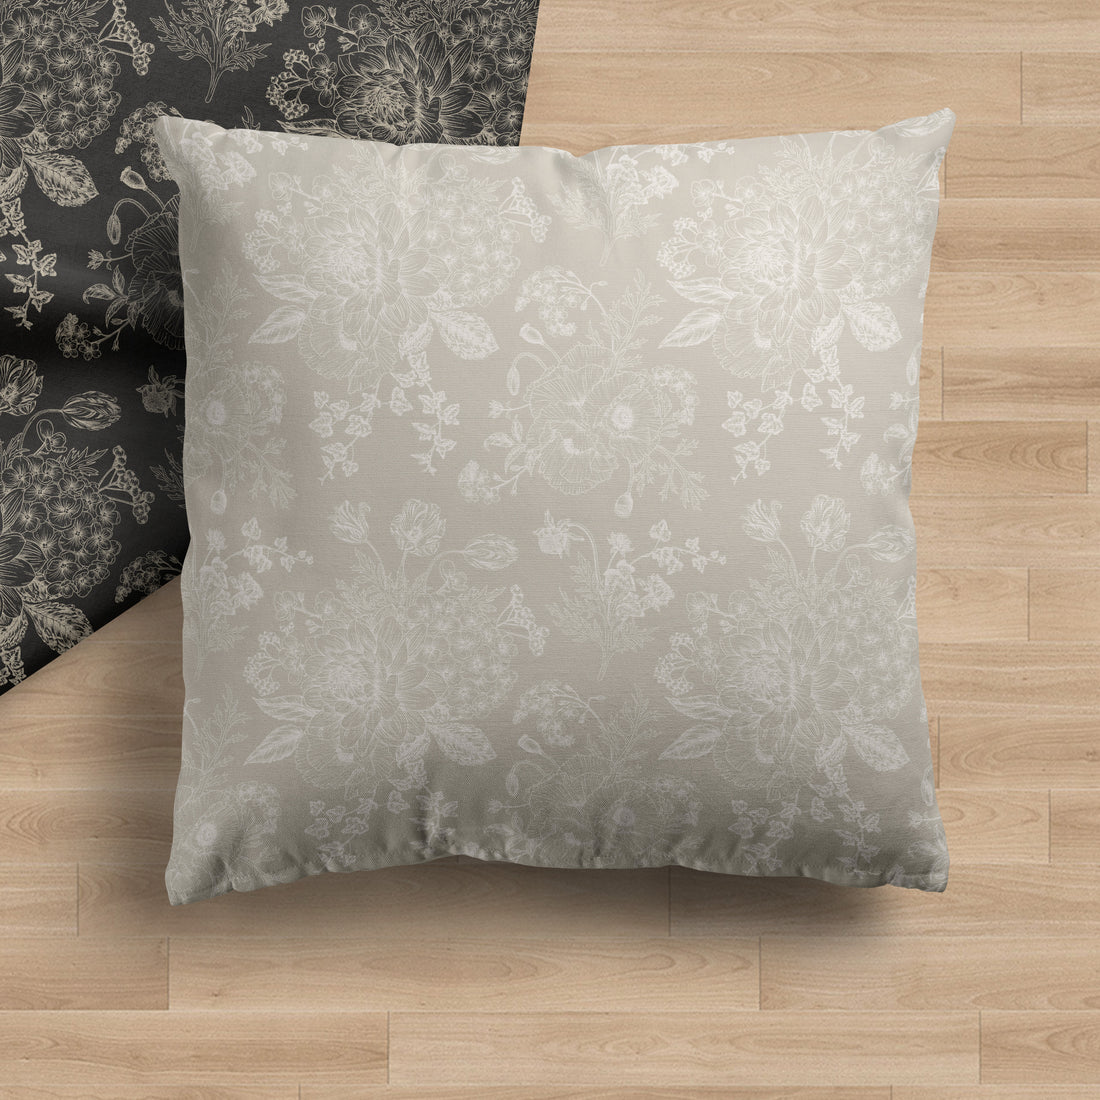 Mia | Light Floral Luxe Pillow Cover